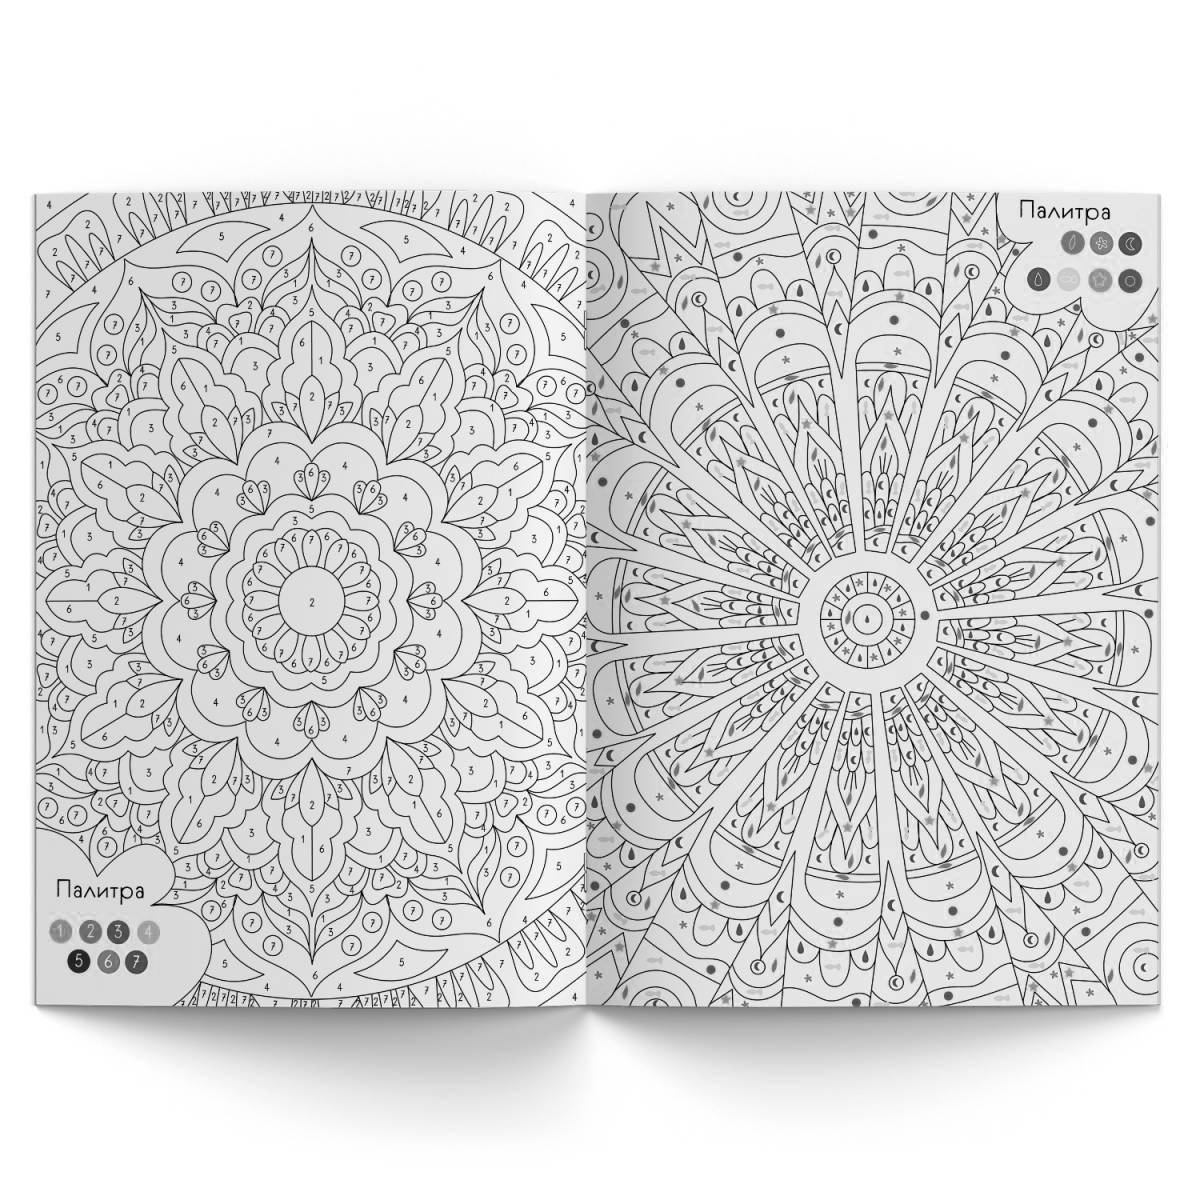 Great mandala coloring by numbers